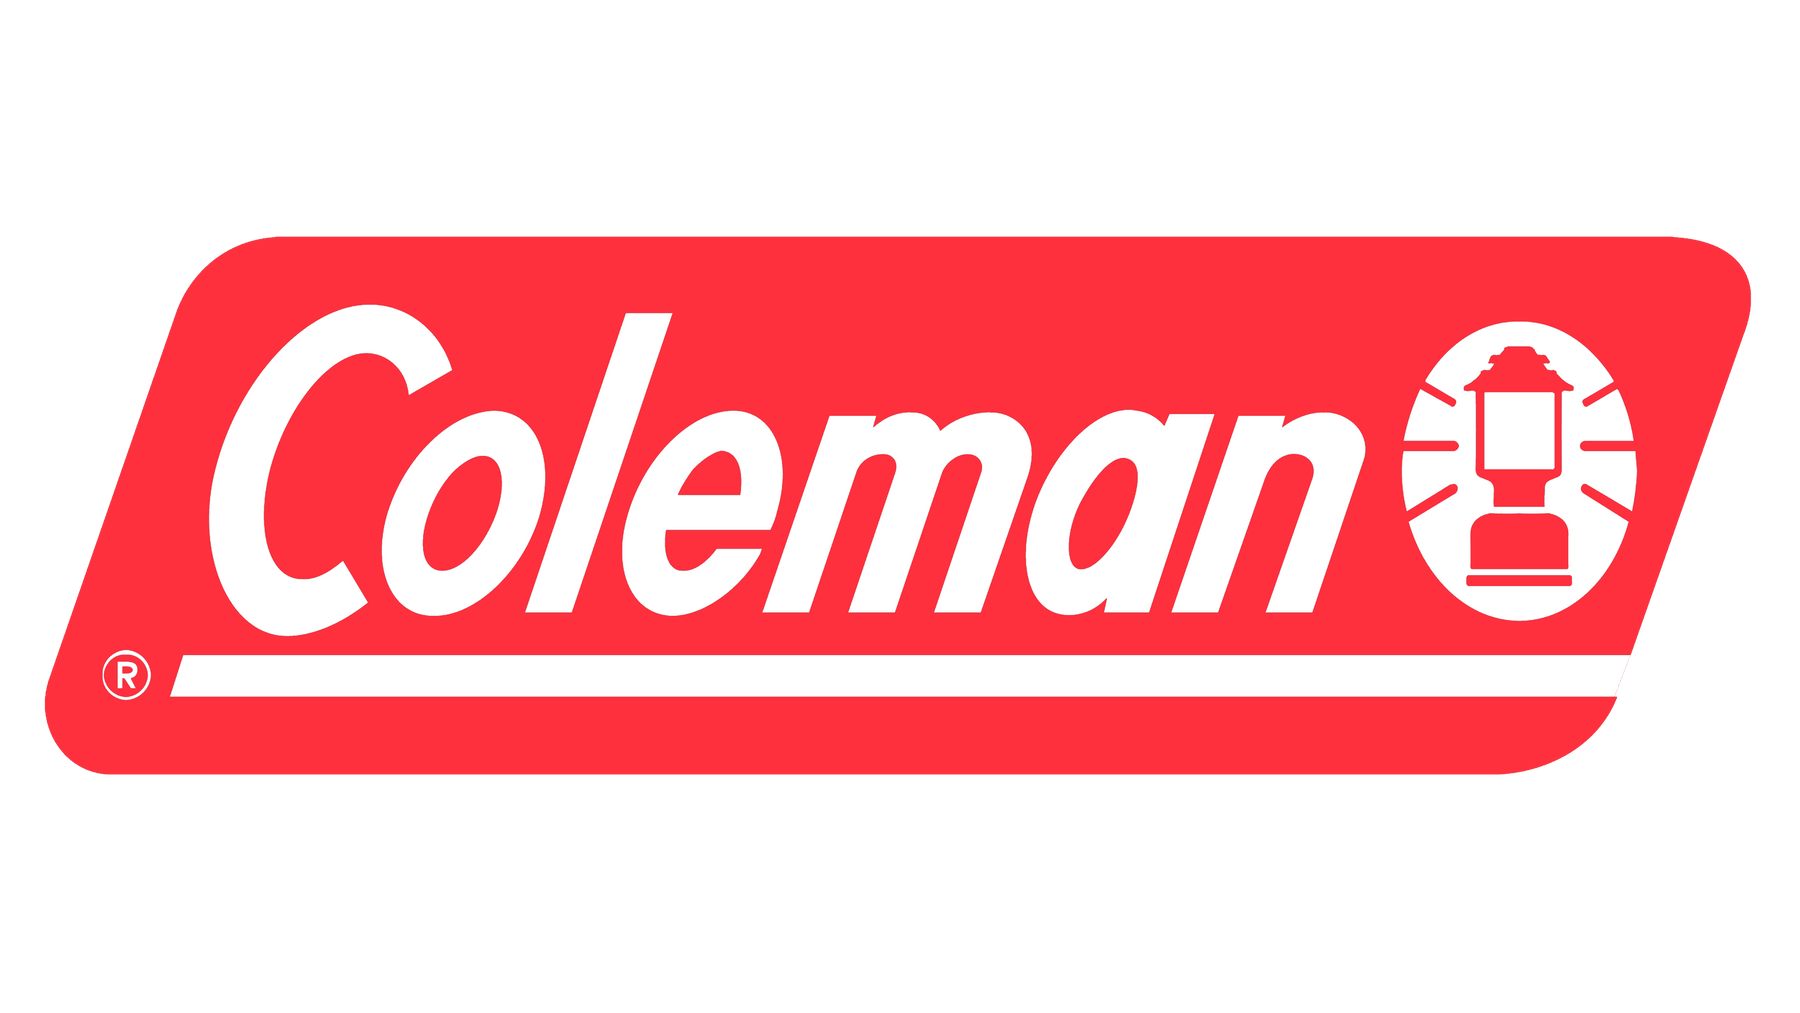 Coleman®: Over 120 Years of Outdoor Excellence